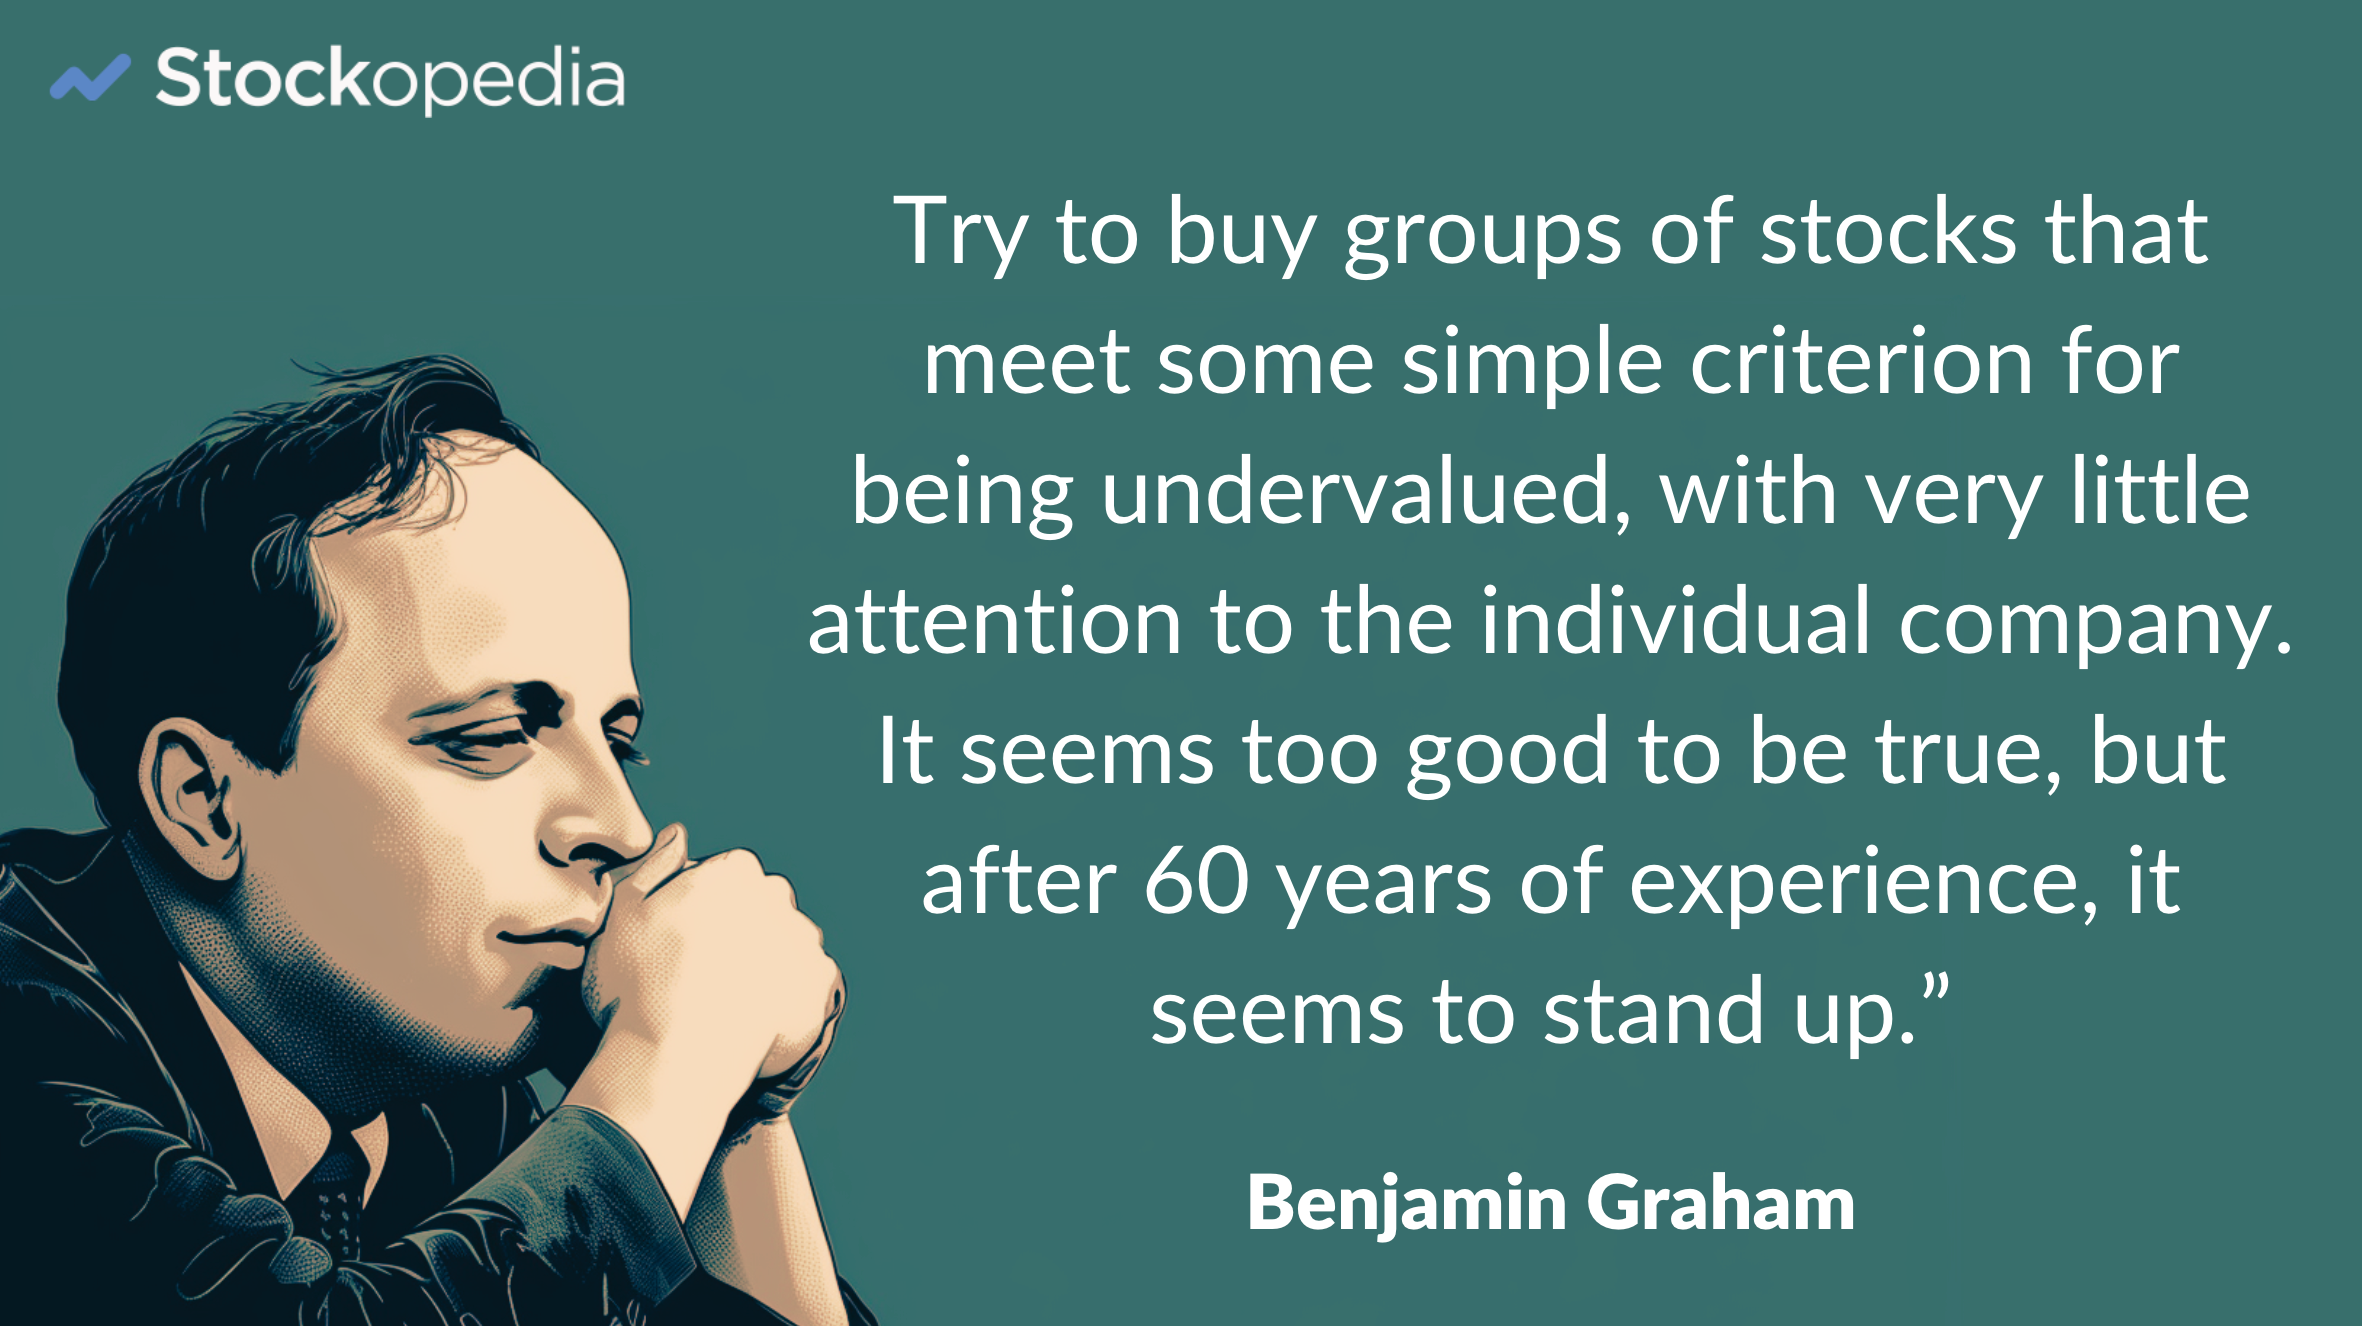 Try to buy groups of stocks that meet some simple criterion for being undervalued — regardless of the industry and with very little attention to the individual company. It seems too good to be true, but all I can tell you after 60 years of experience, it seems to stand up under any of the tests I would make up.”